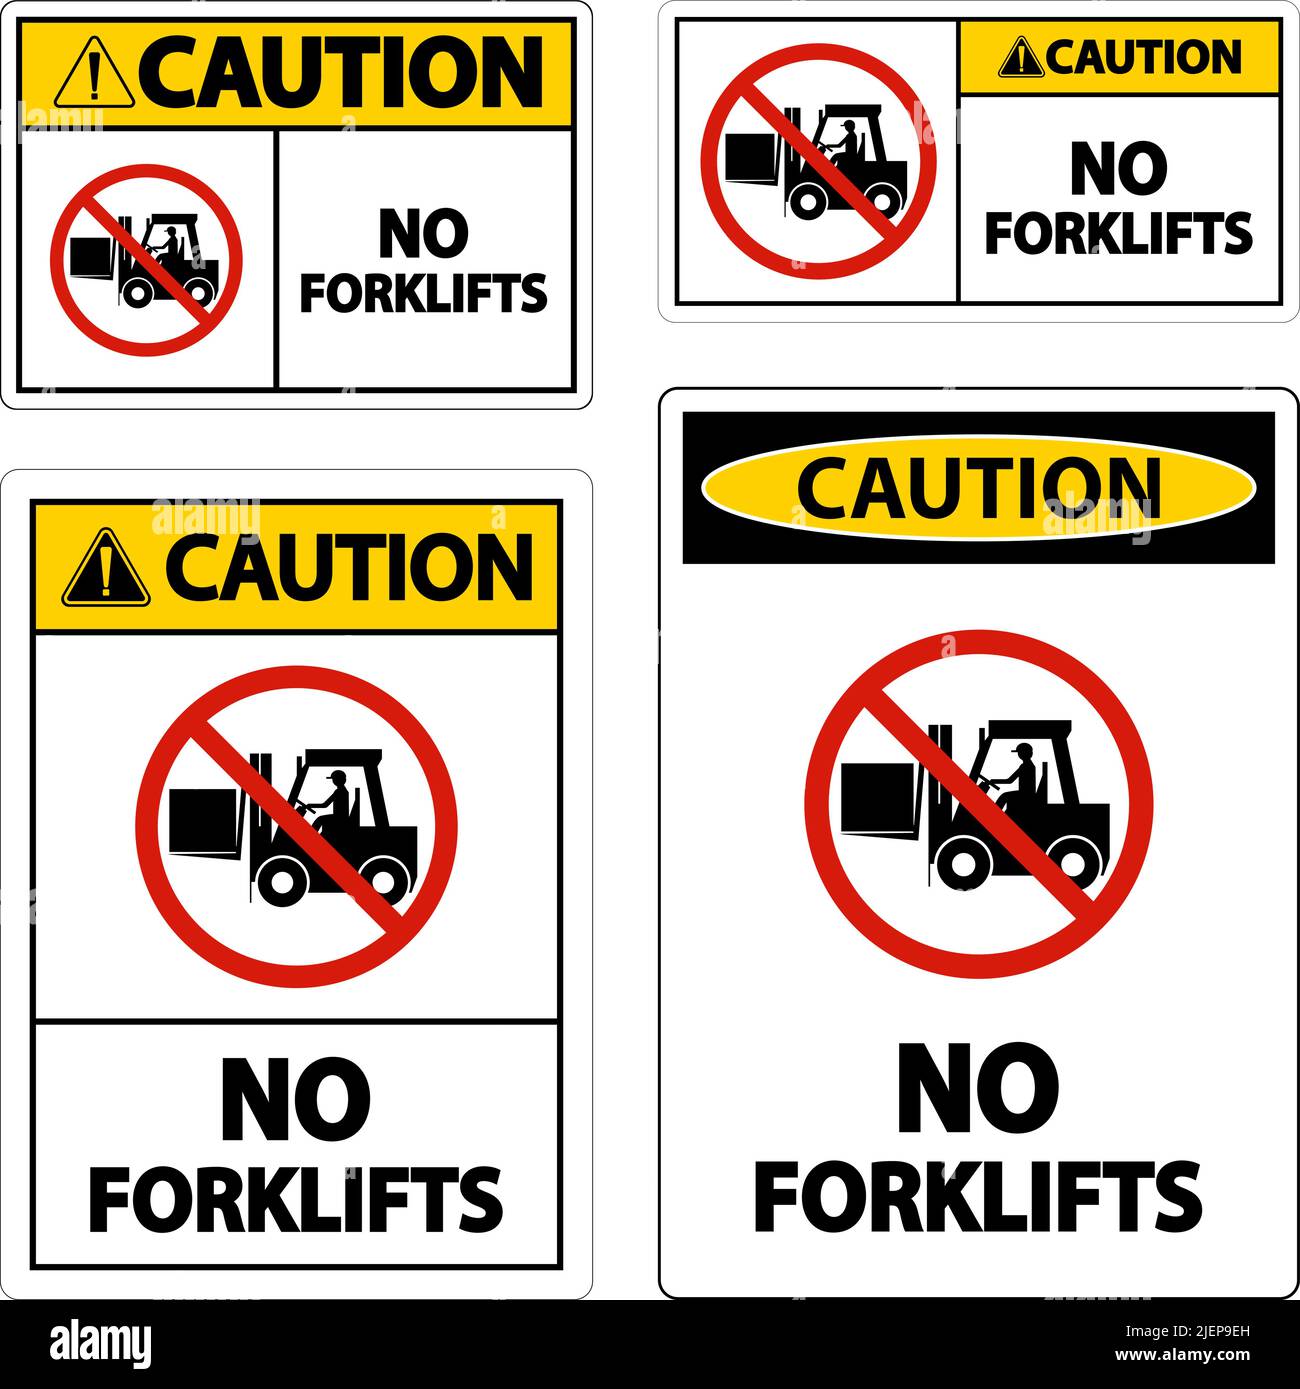 Caution No Forklifts Sign On White Background Stock Vector Image & Art ...